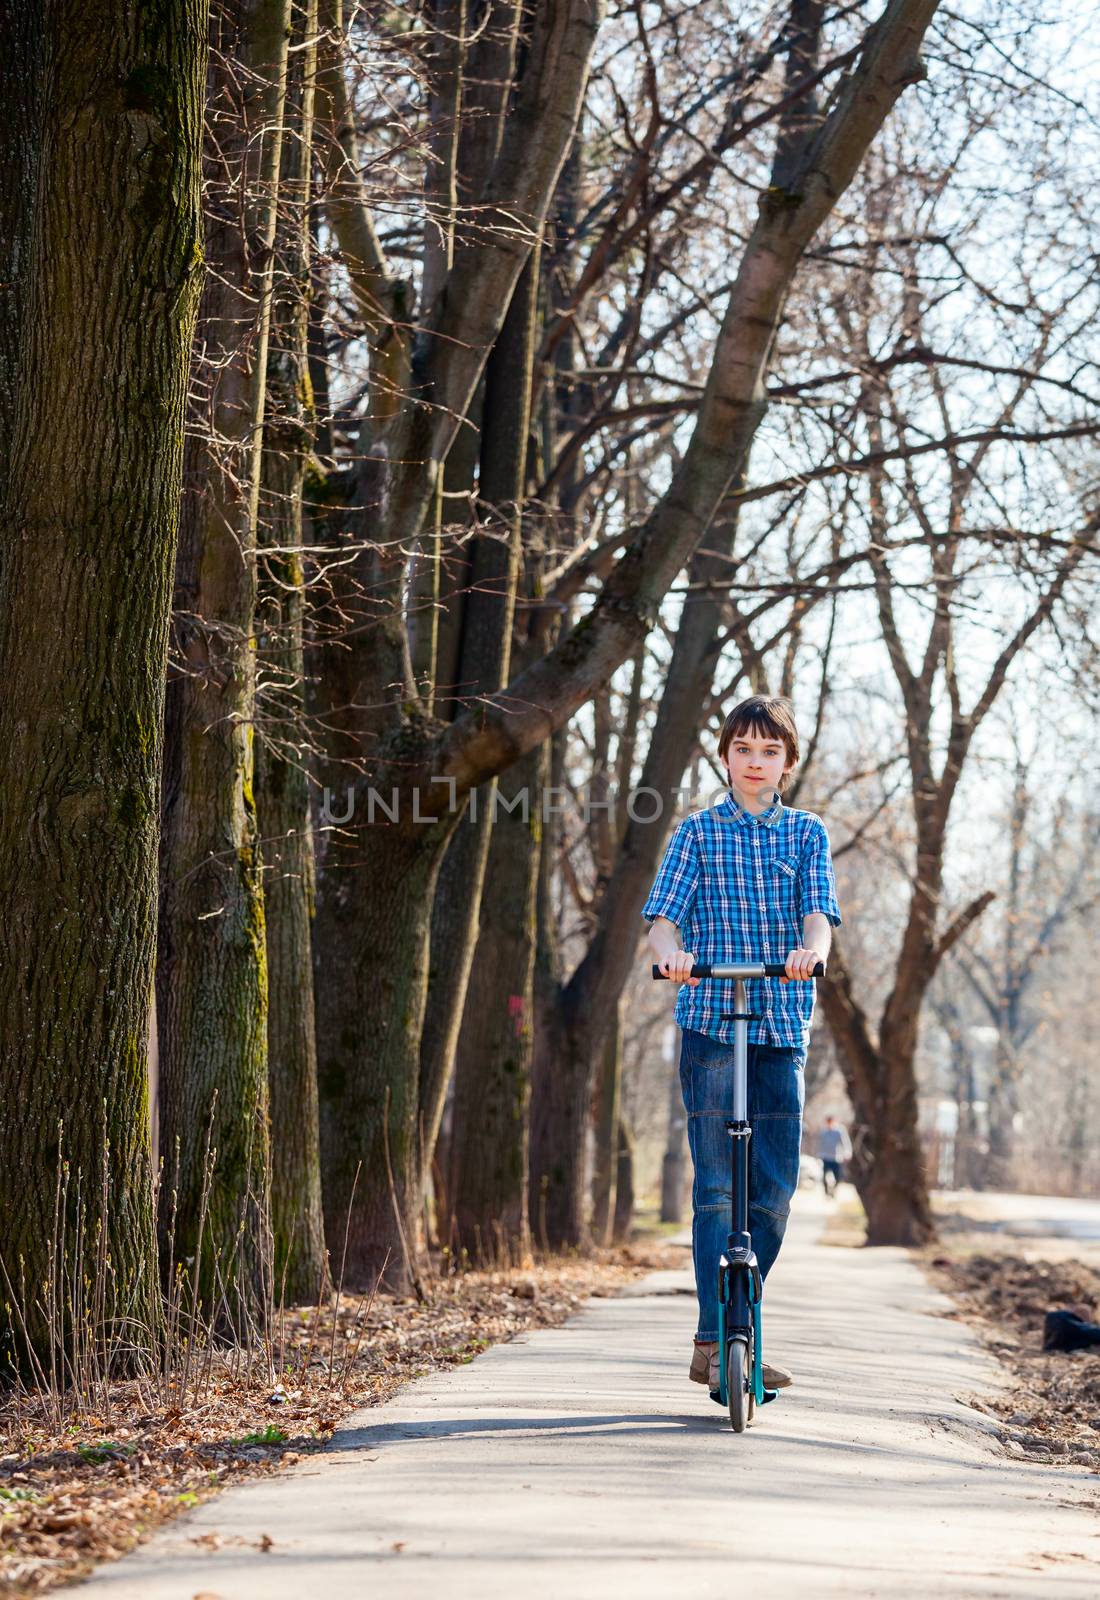 Kid riding his push scooter outdoors